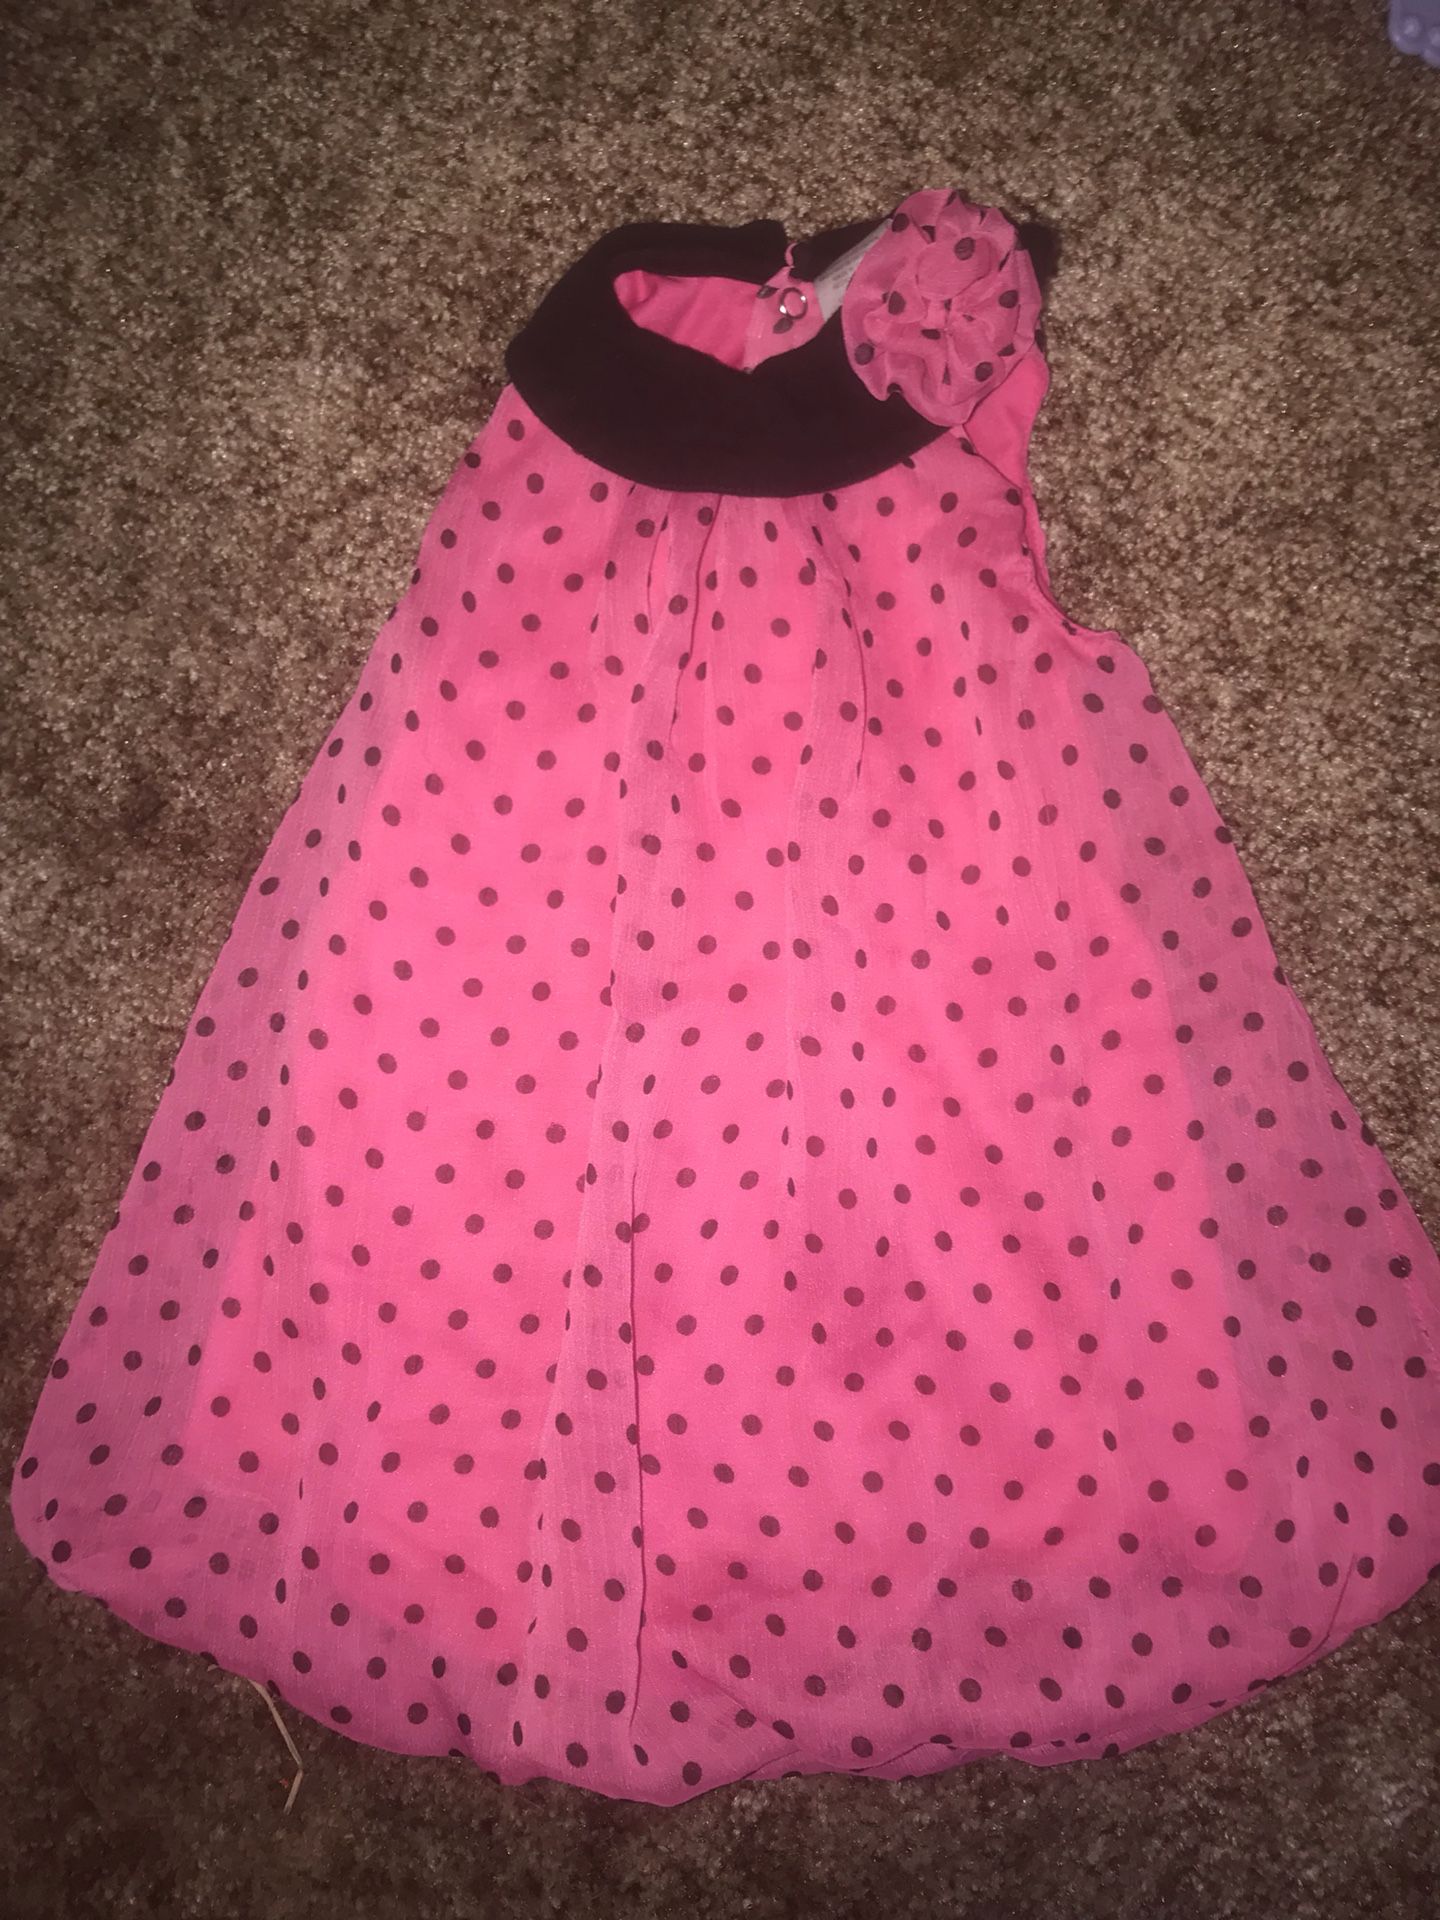 Precious infant Easter dresses and clothes size newborn to kids size 10